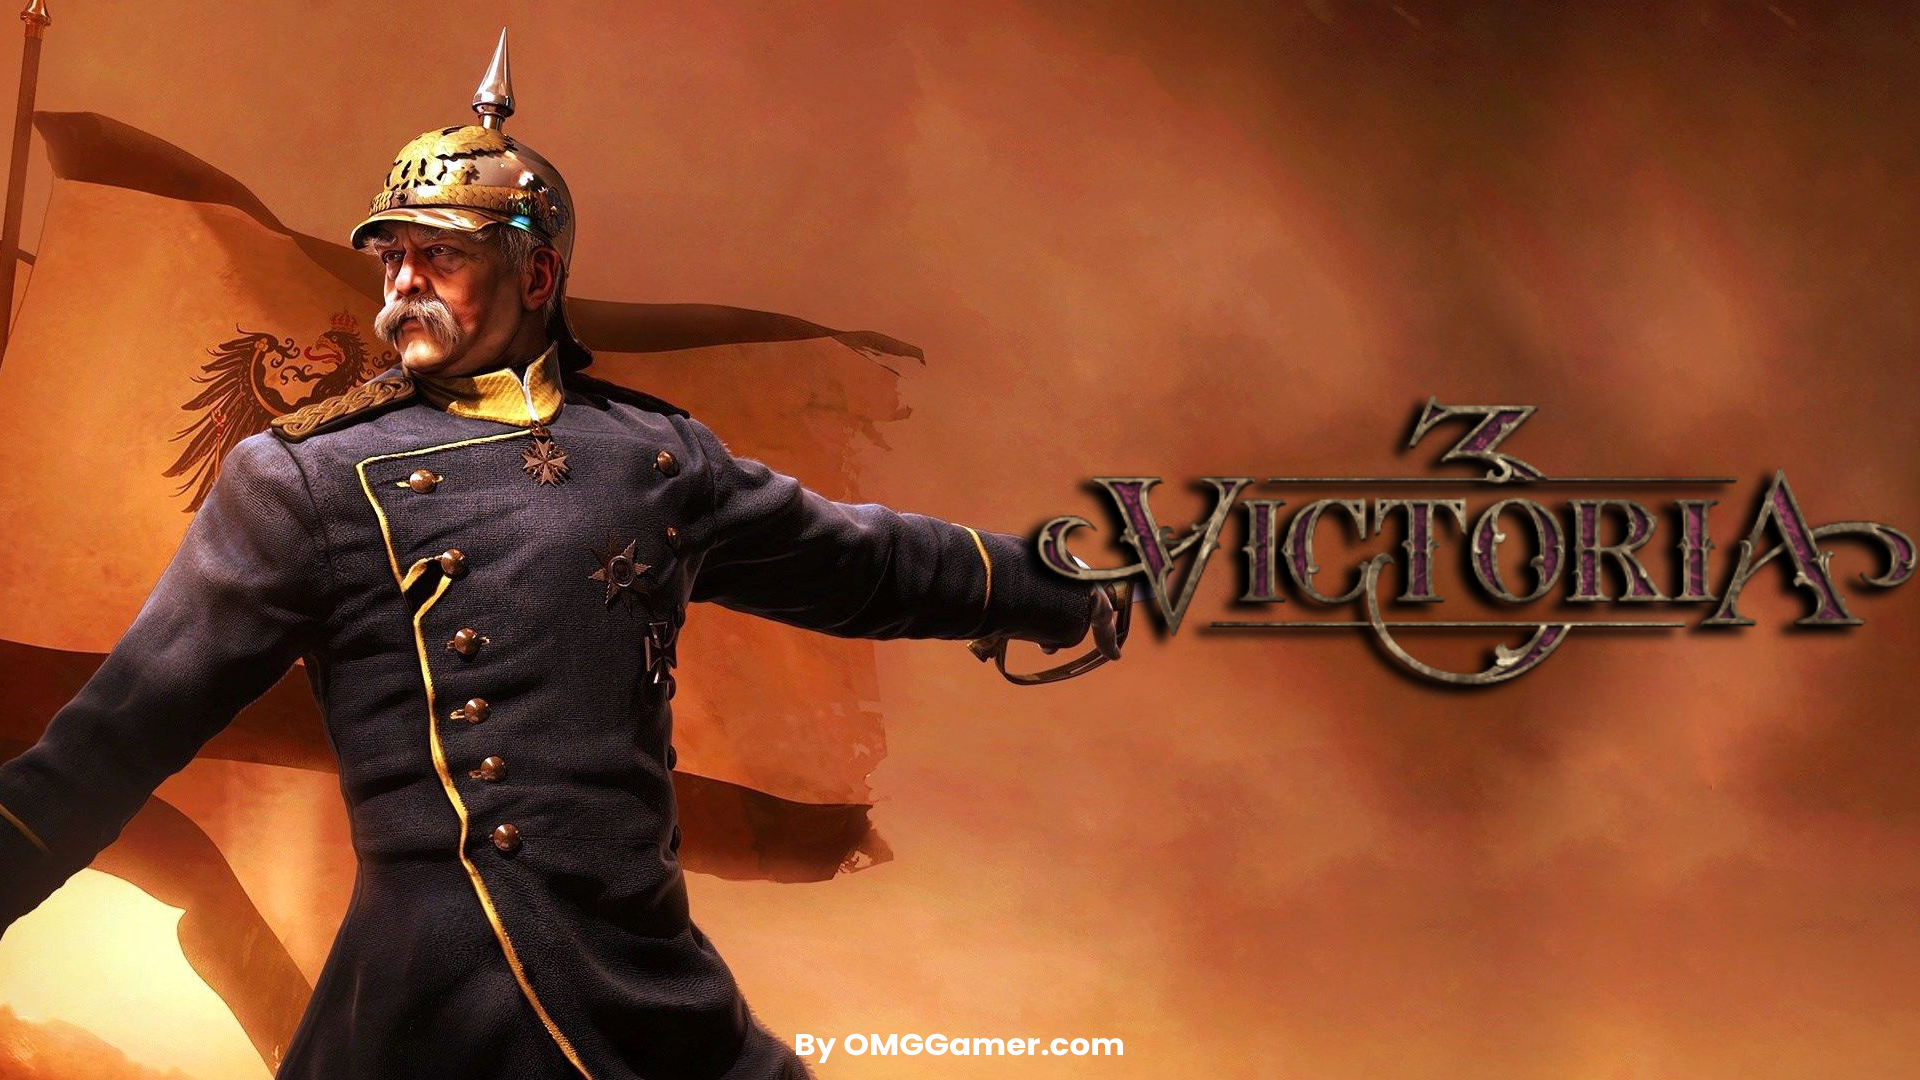 Victoria-3-Release-Date-System-Requirements-Trailer-Rumors